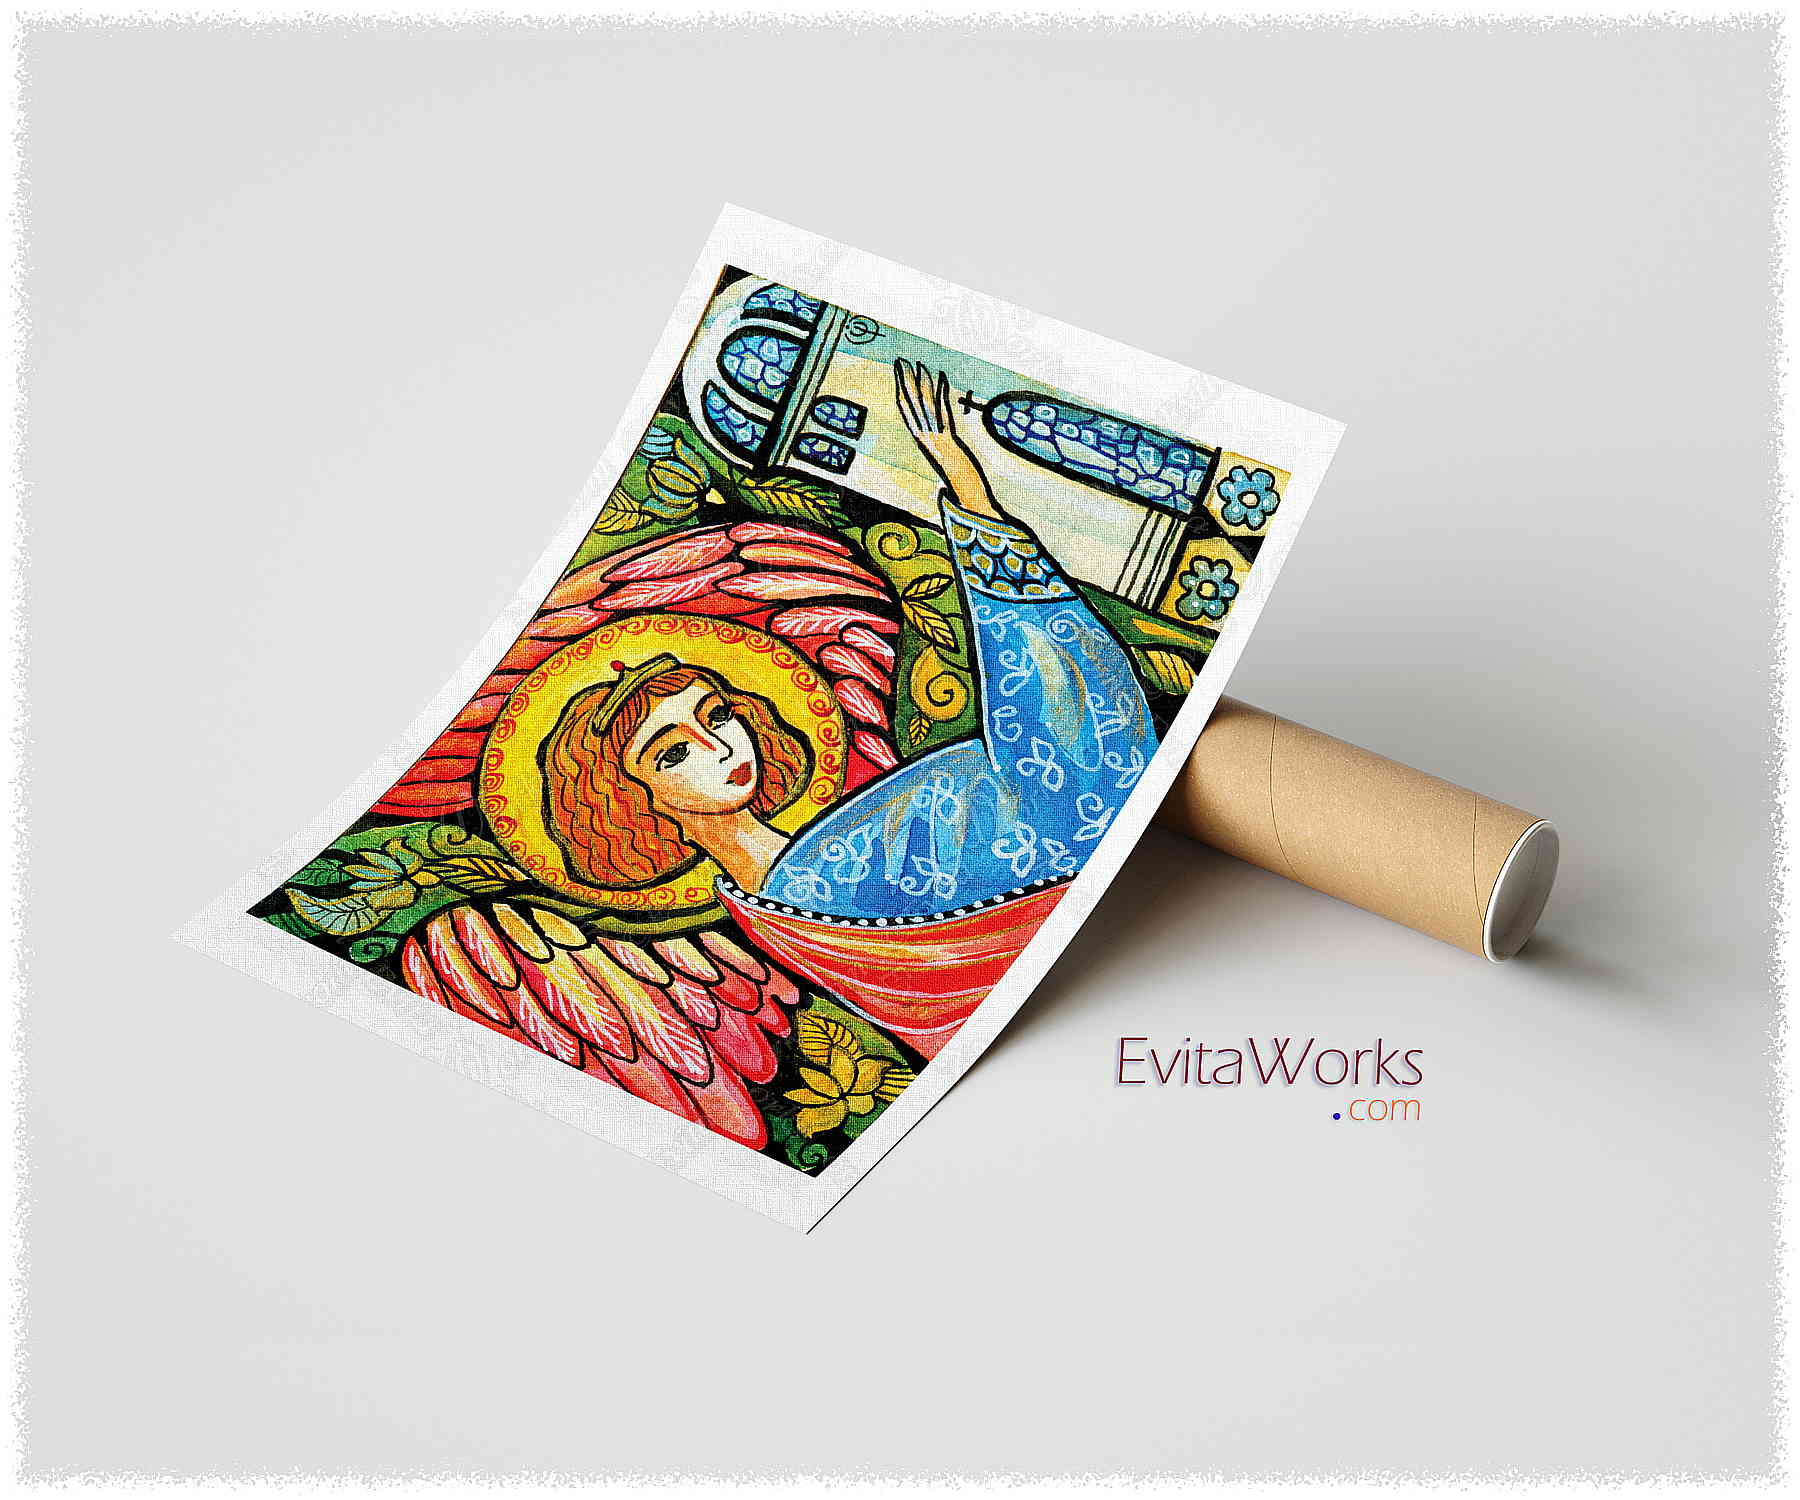 Hit to learn about "Angel 34, Christian art" on prints